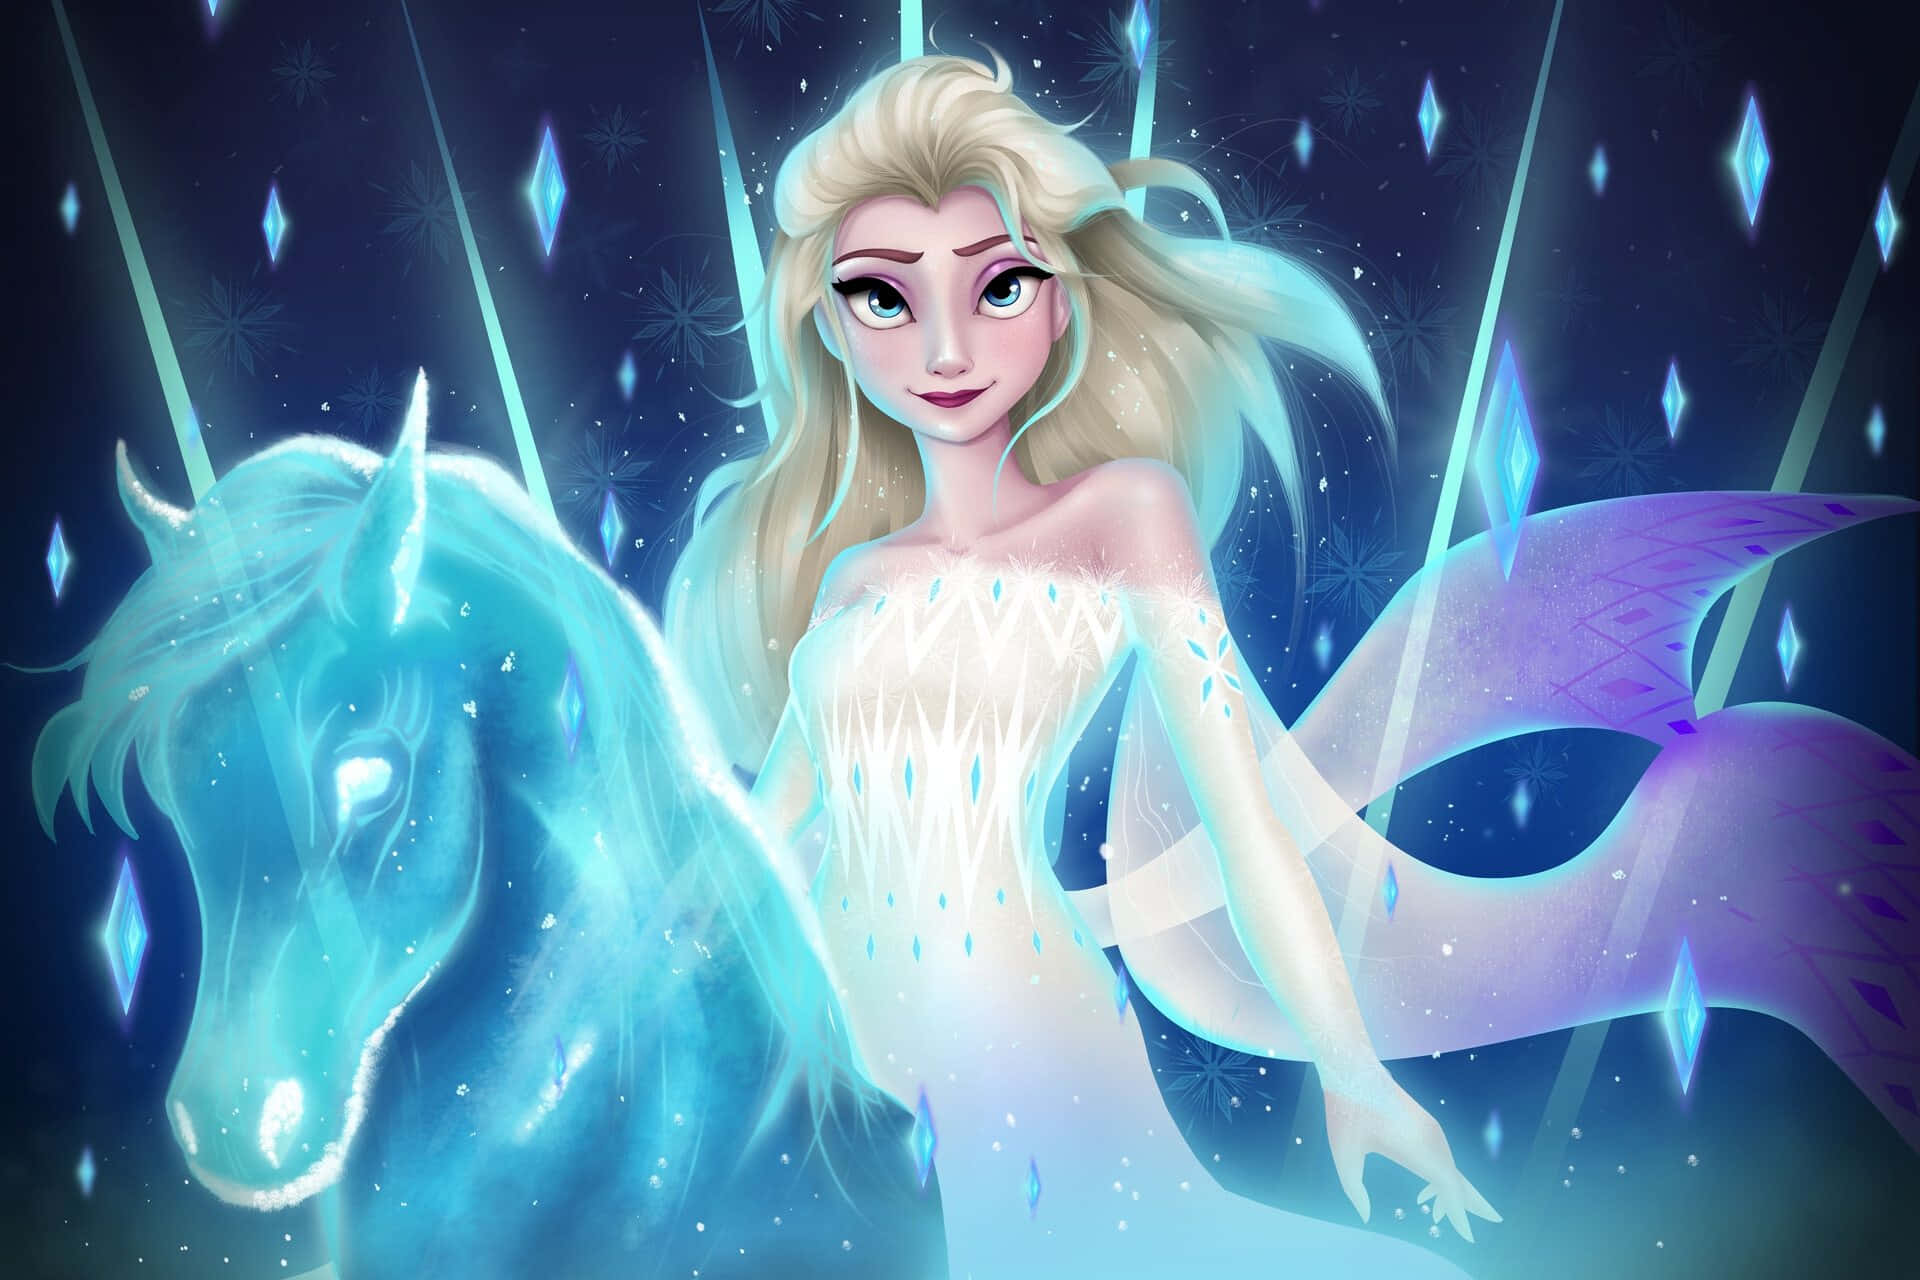 Dive into the world of Disney with these magical profile pictures